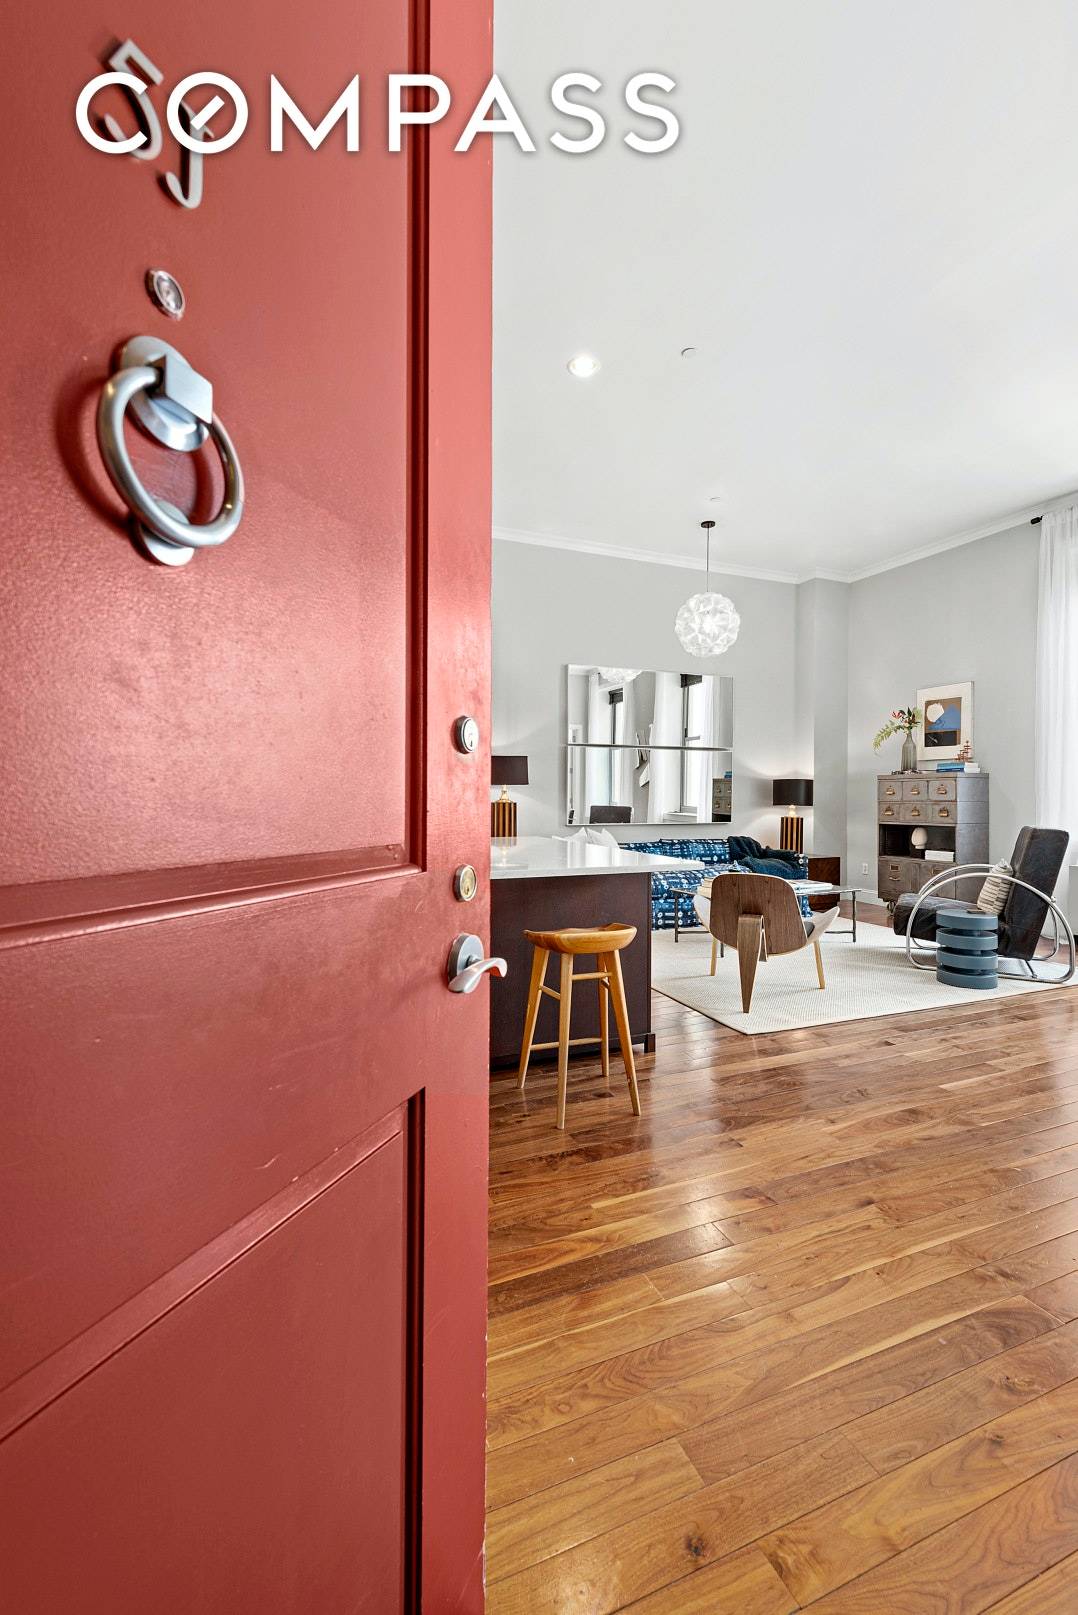 Spanning over 1, 000 square feet with soaring 13 foot ceilings, apartment 5J is a beautiful one bedroom loft with one and a half bathrooms.